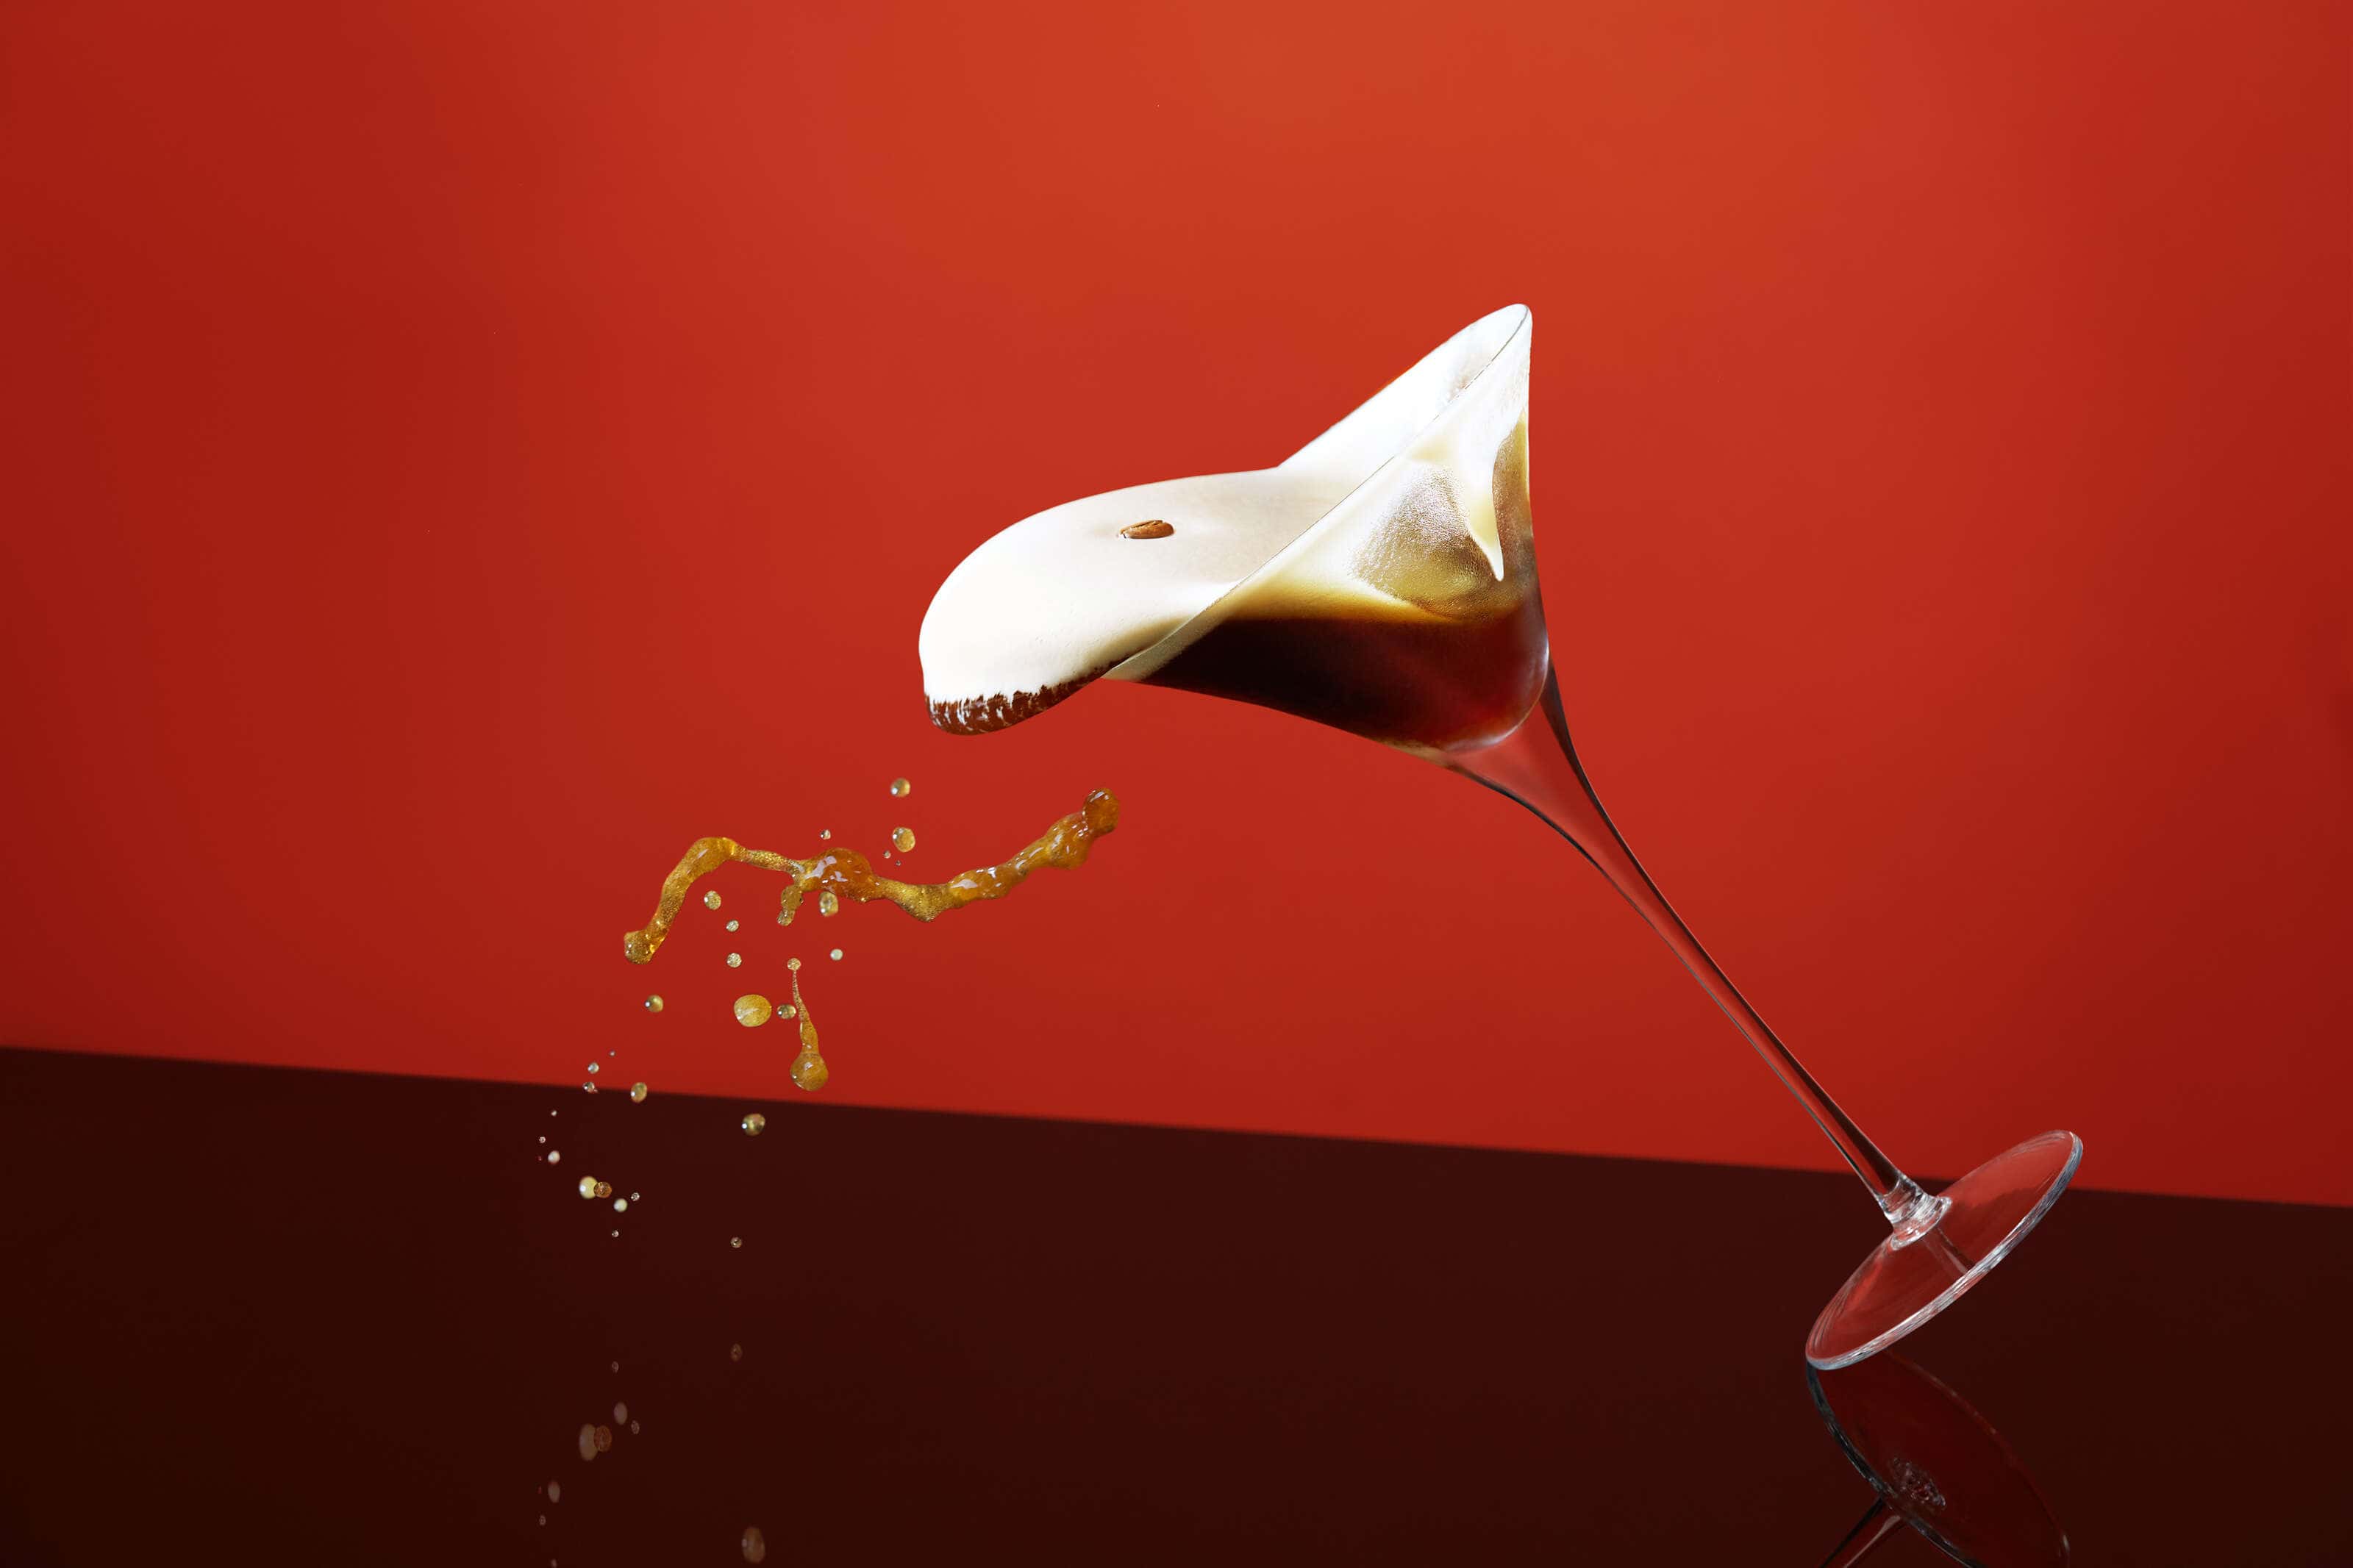 espresso_martini_splashing out of glass onto perspex with red background